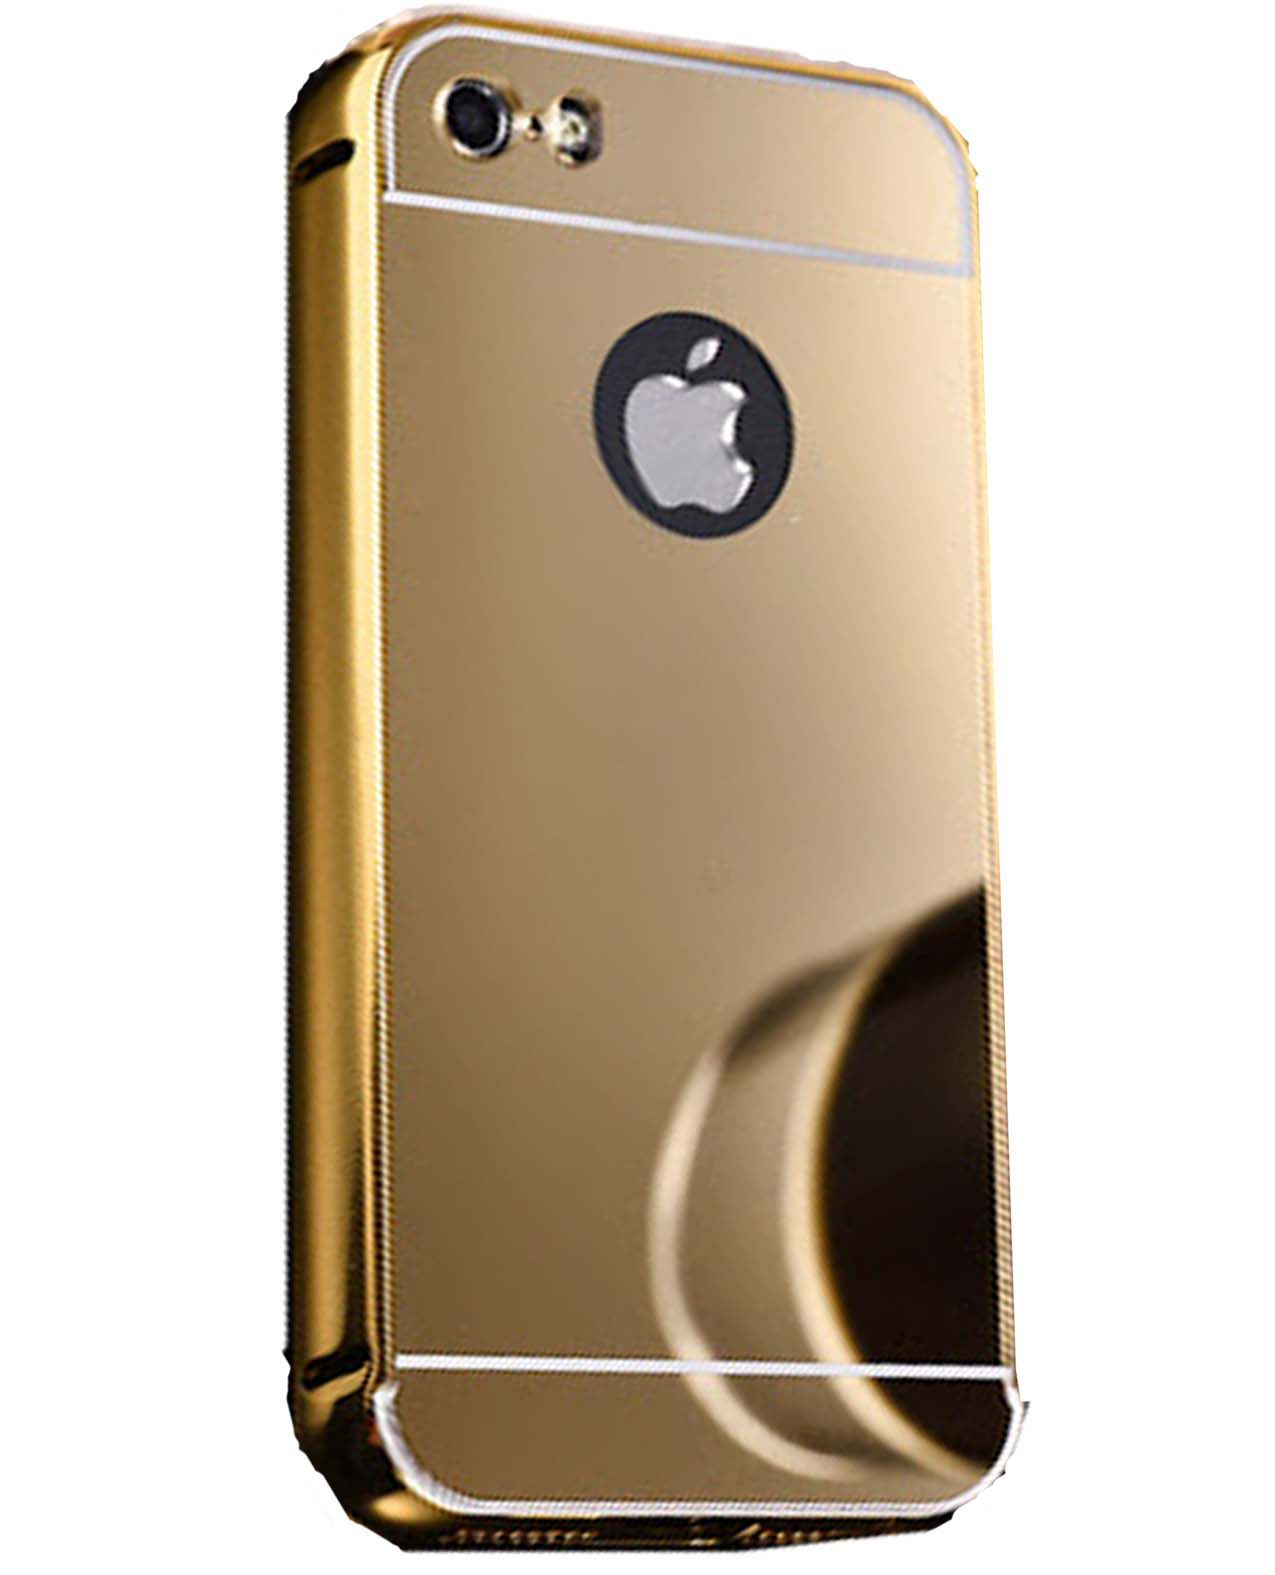 Oven cruise Makkelijk te lezen Apple iPhone 5S Cover by JKR - Golden - Plain Back Covers Online at Low  Prices | Snapdeal India